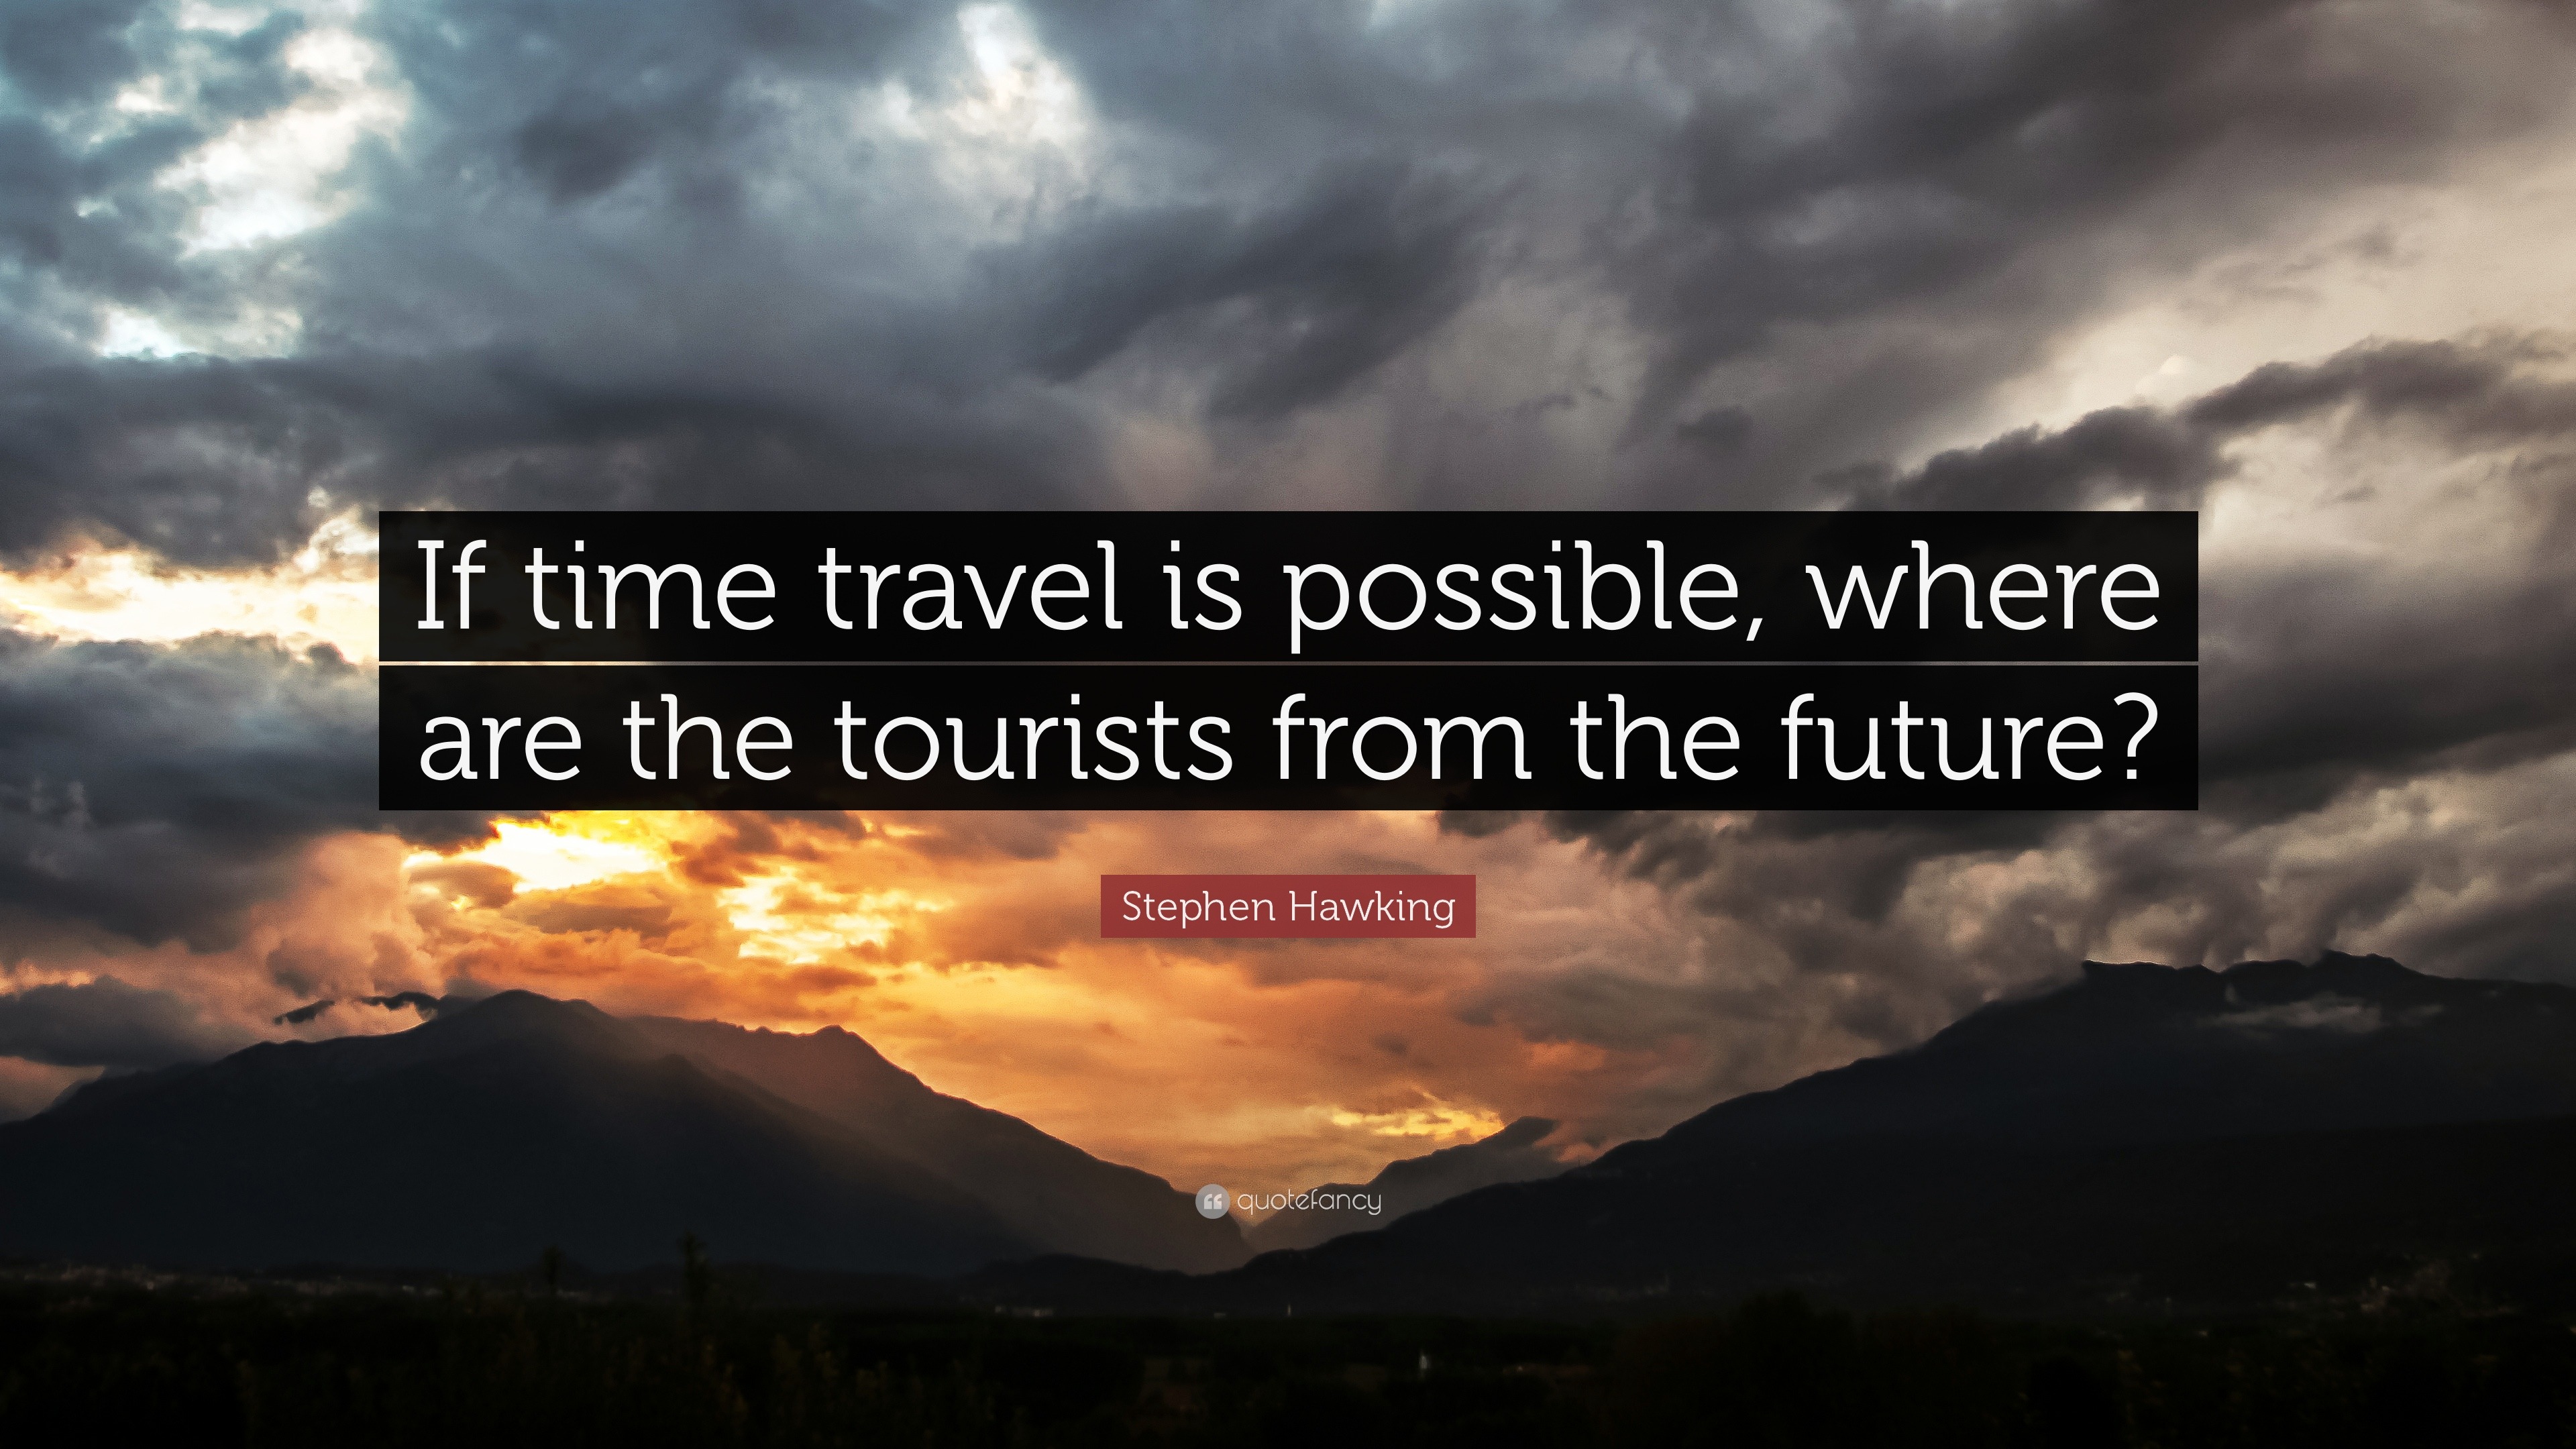 famous quotes about time travel